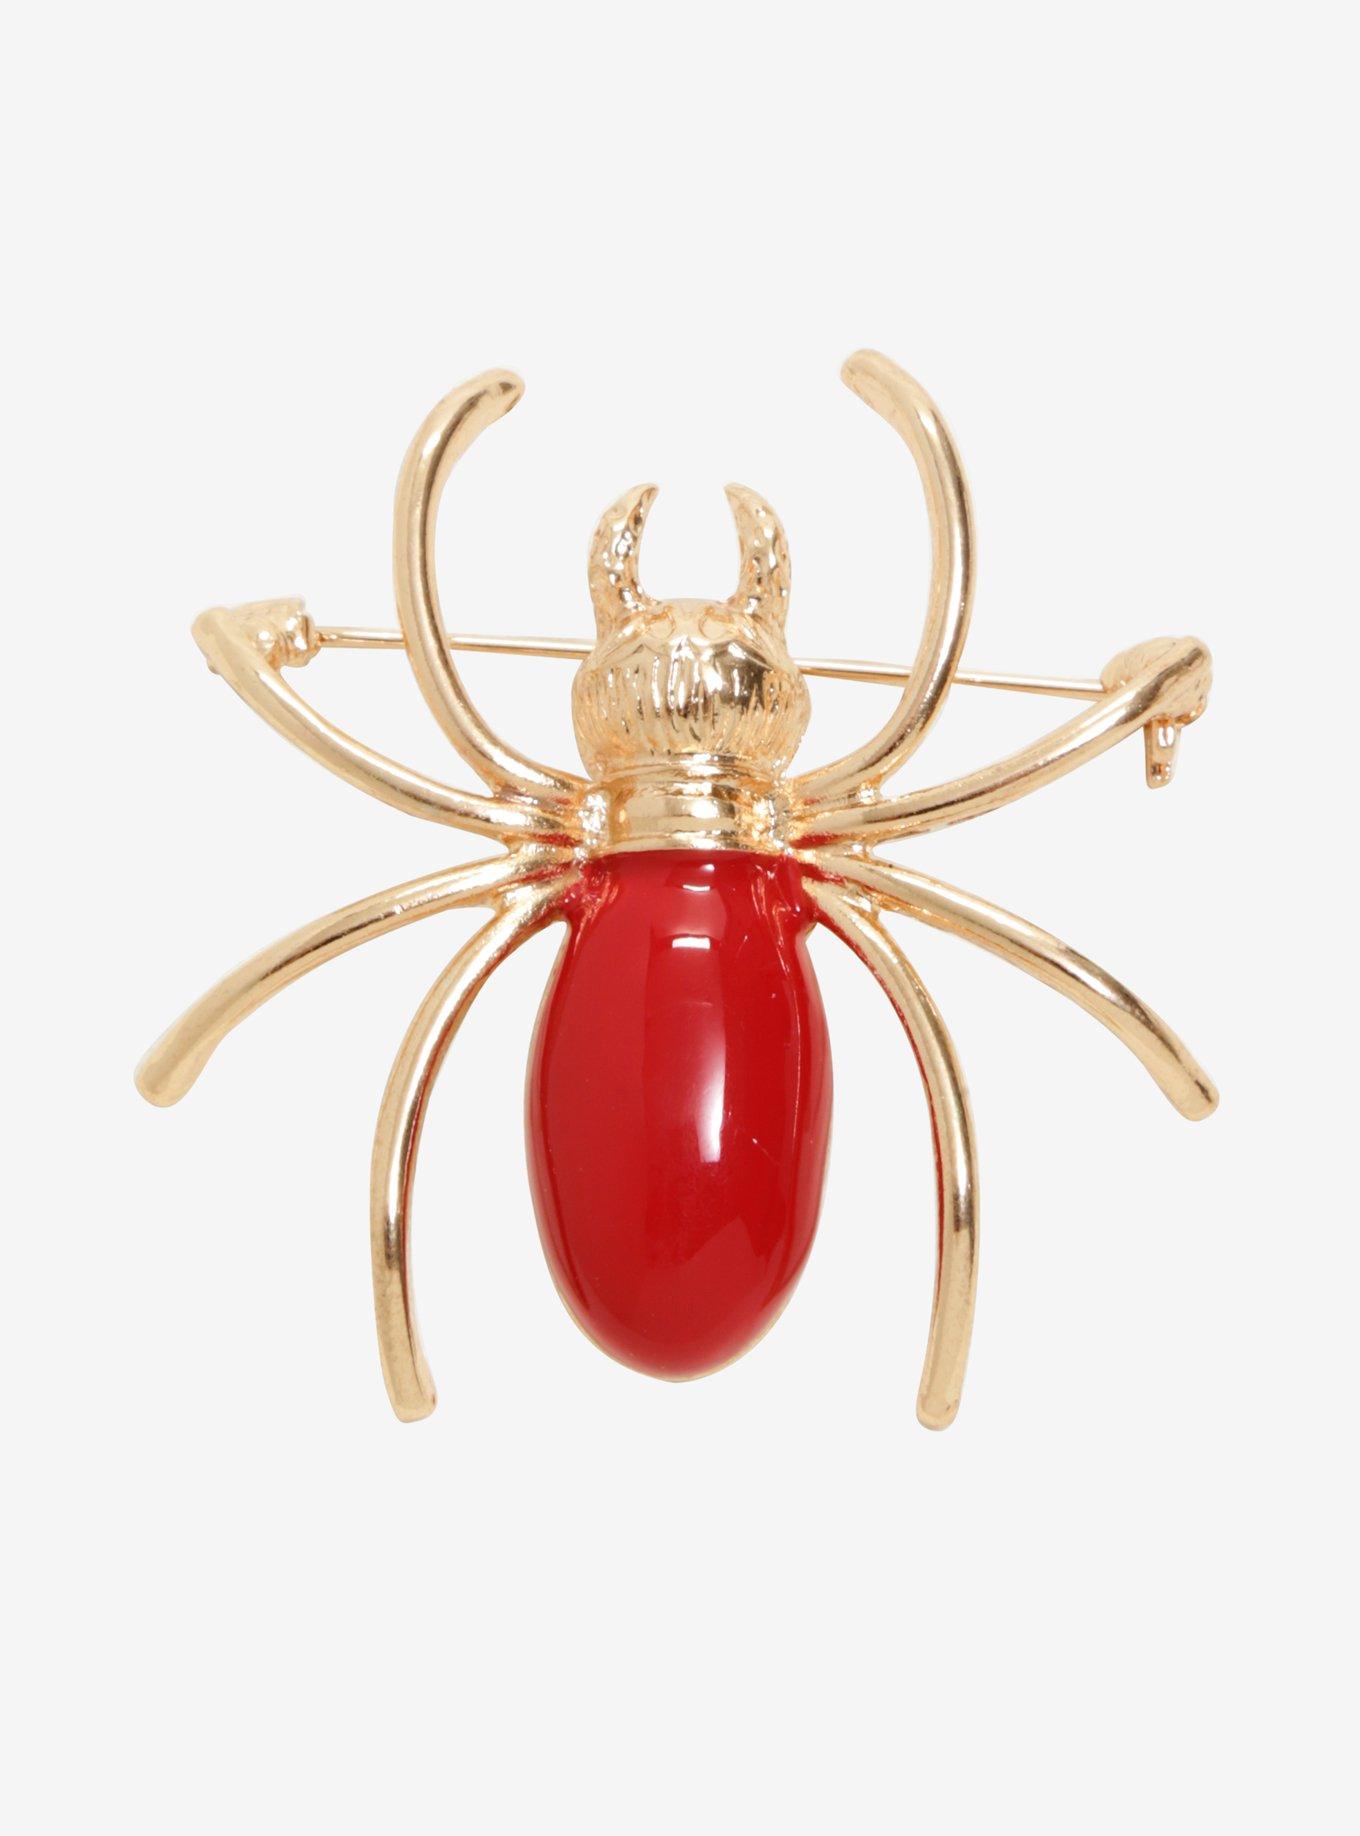 Channel your inner Cheryl Blossom with our fabulous Spider Brooch